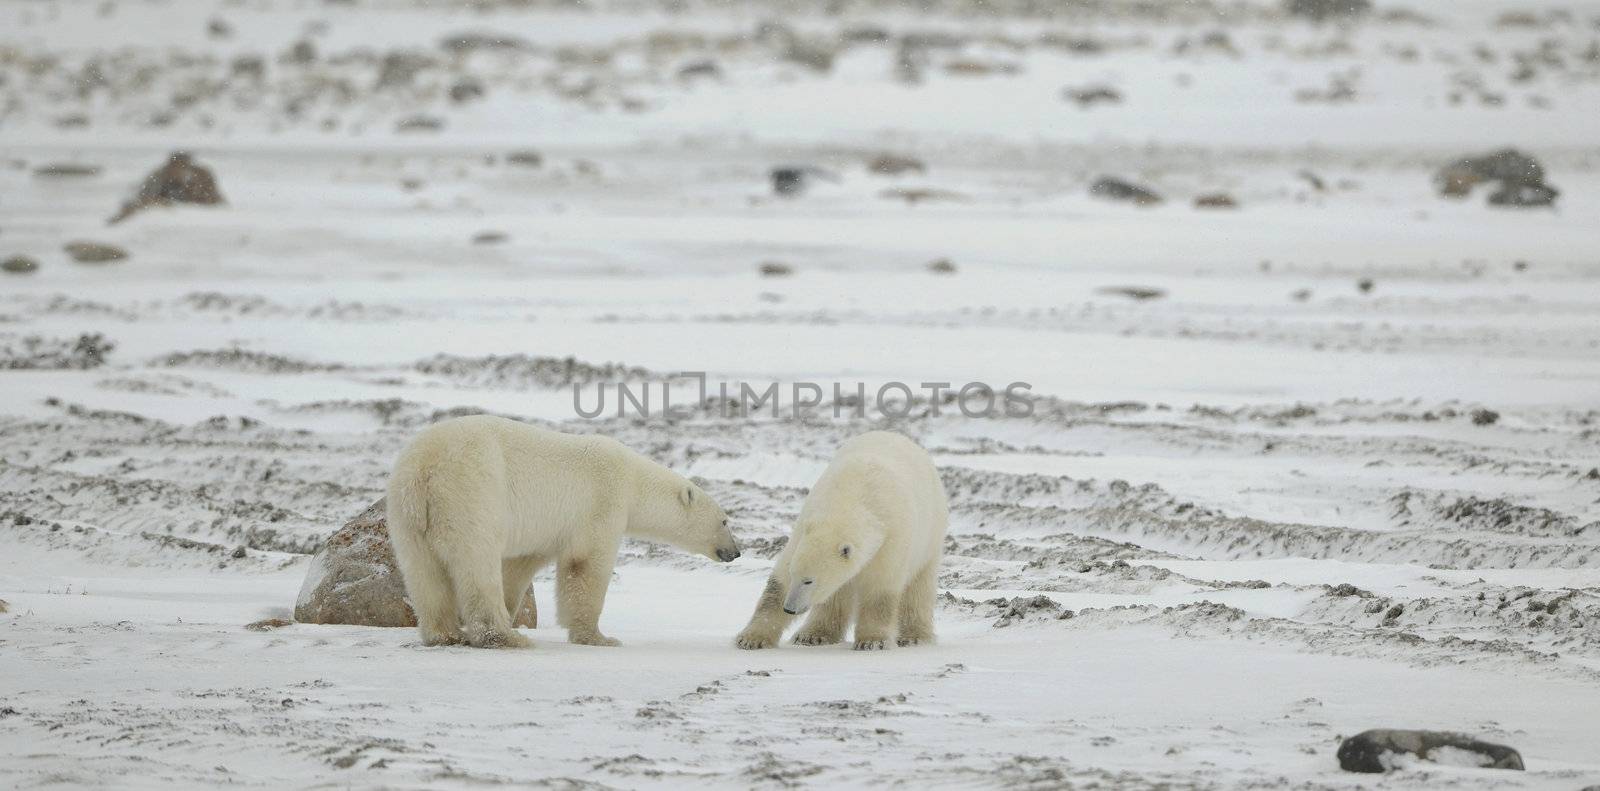 Meeting. Two polar bears have met and sniff each other. Tundra in snow blizzard.